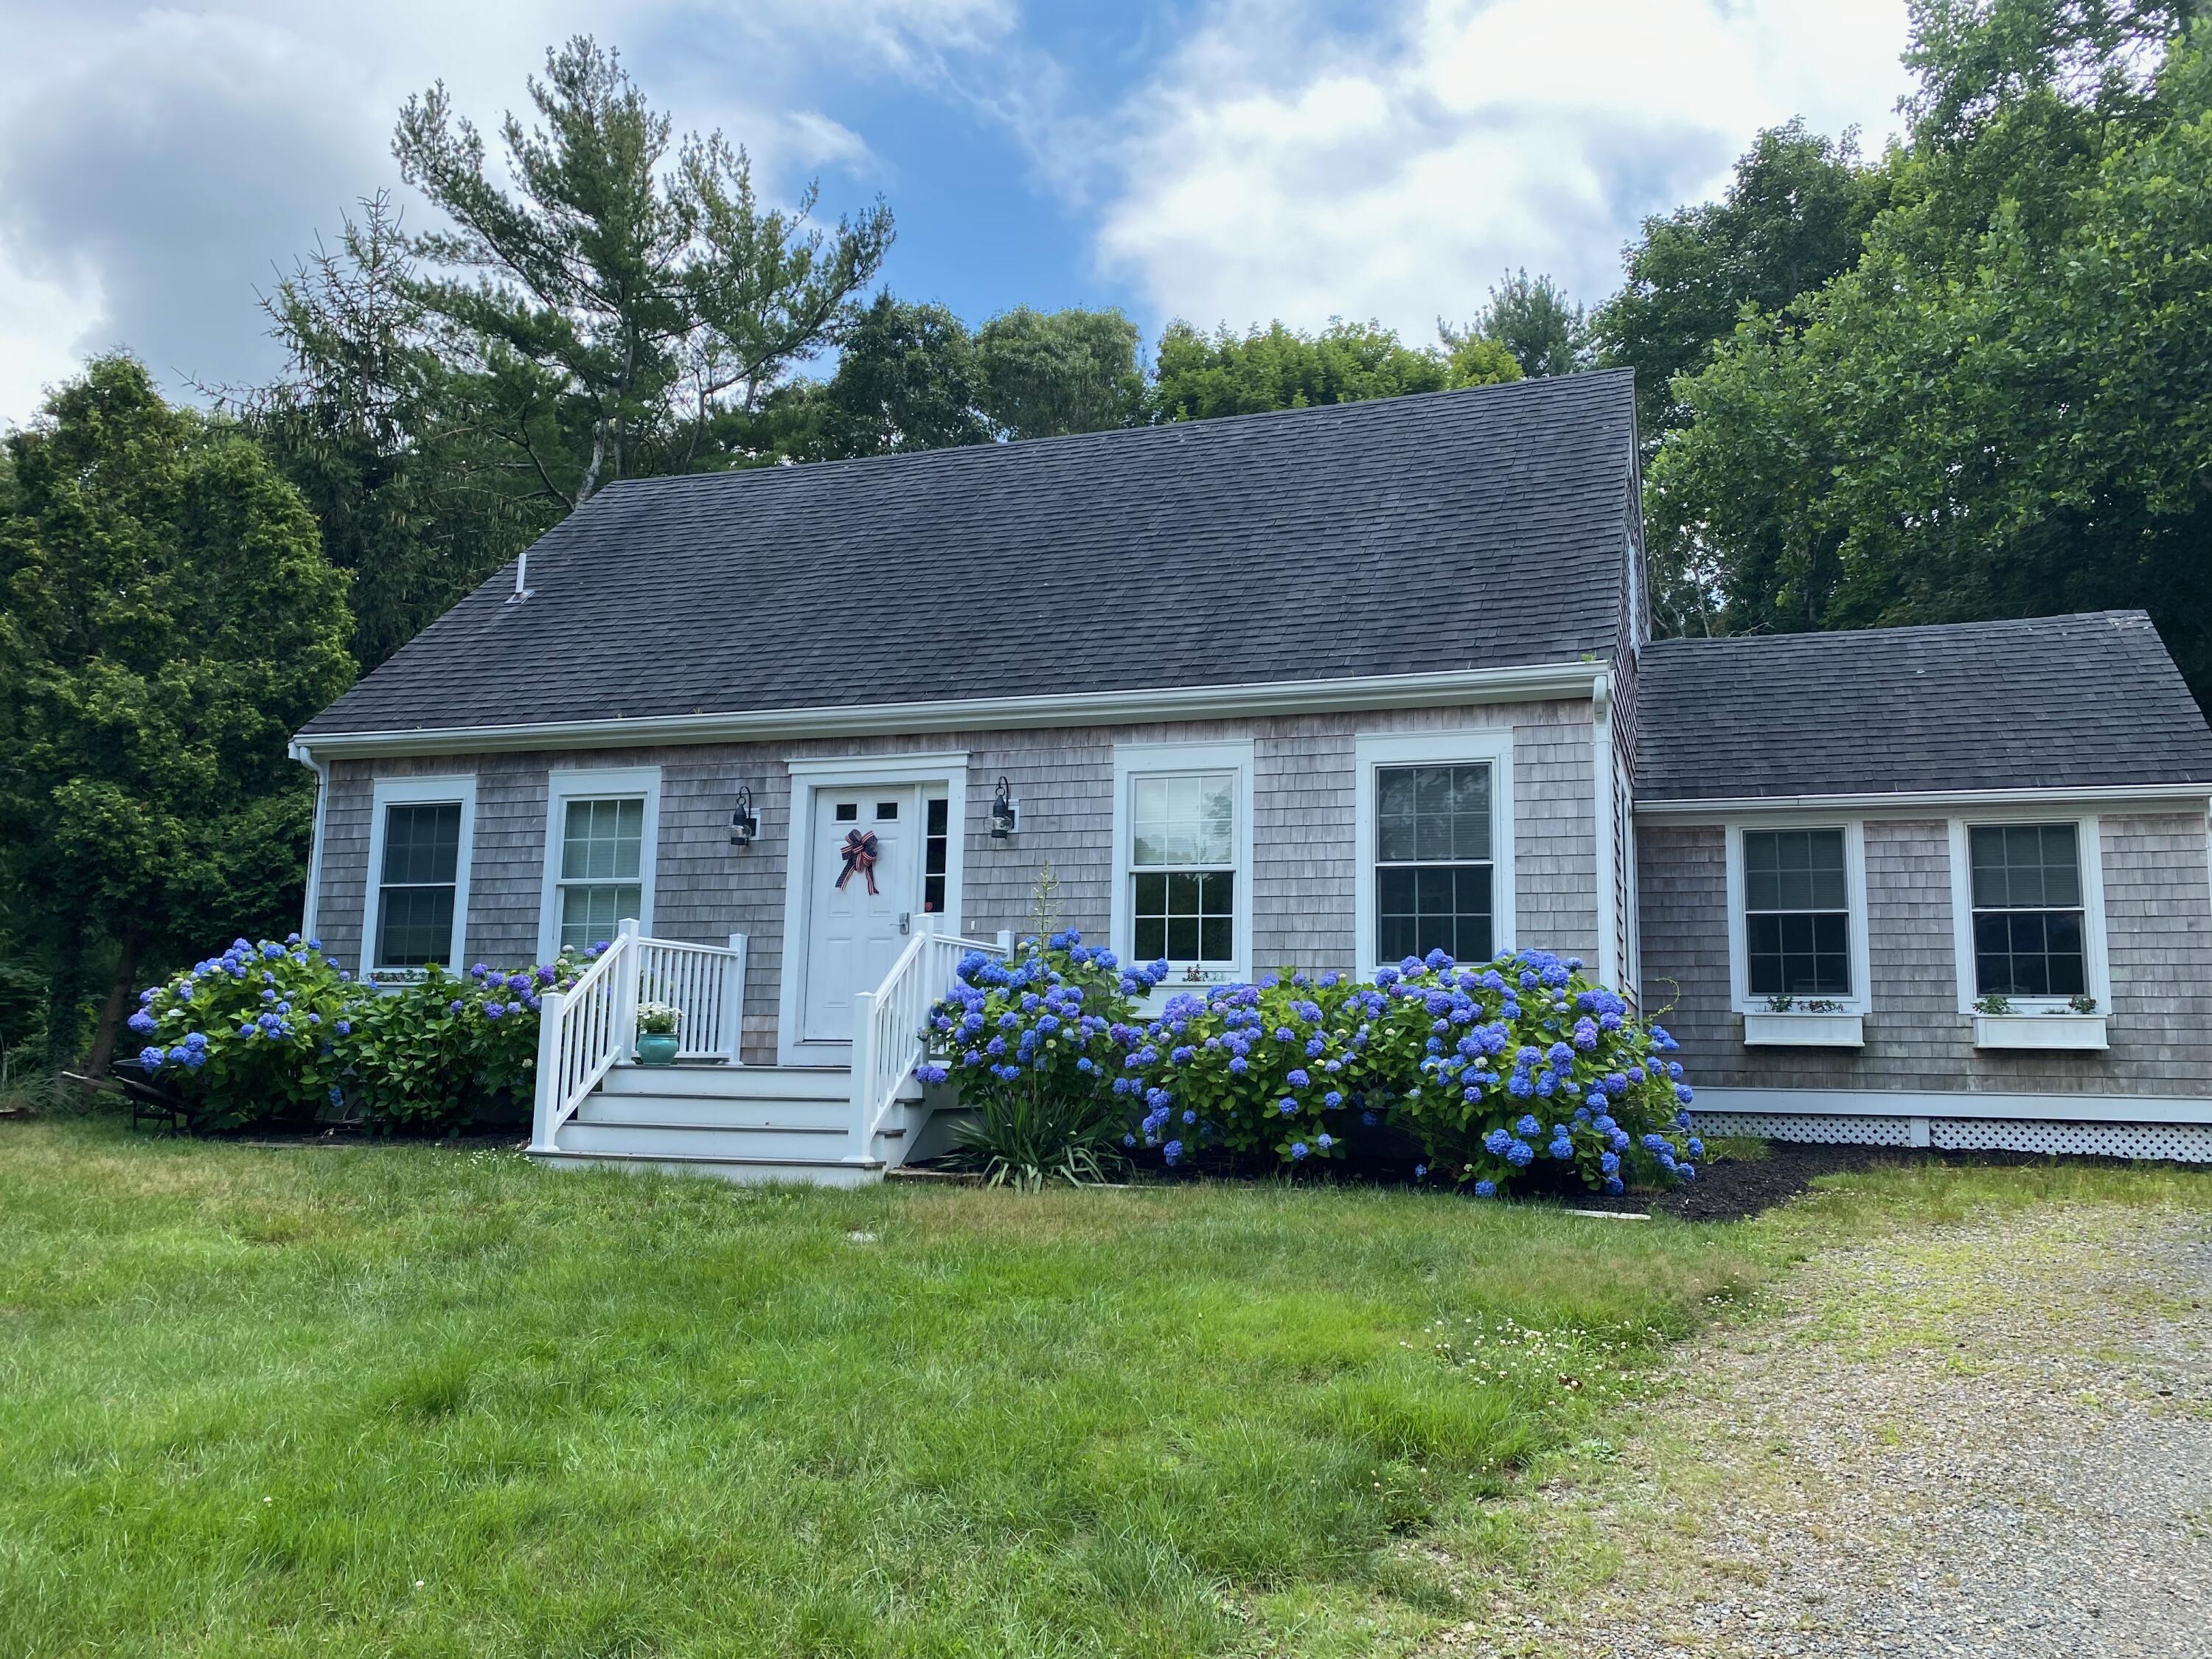 20 Monmouth Circle, North Falmouth, Massachusetts 02556, 5 Bedrooms Bedrooms, 7 Rooms Rooms,2 BathroomsBathrooms,Residential Lease,For Rent,20 Monmouth Circle,22305170